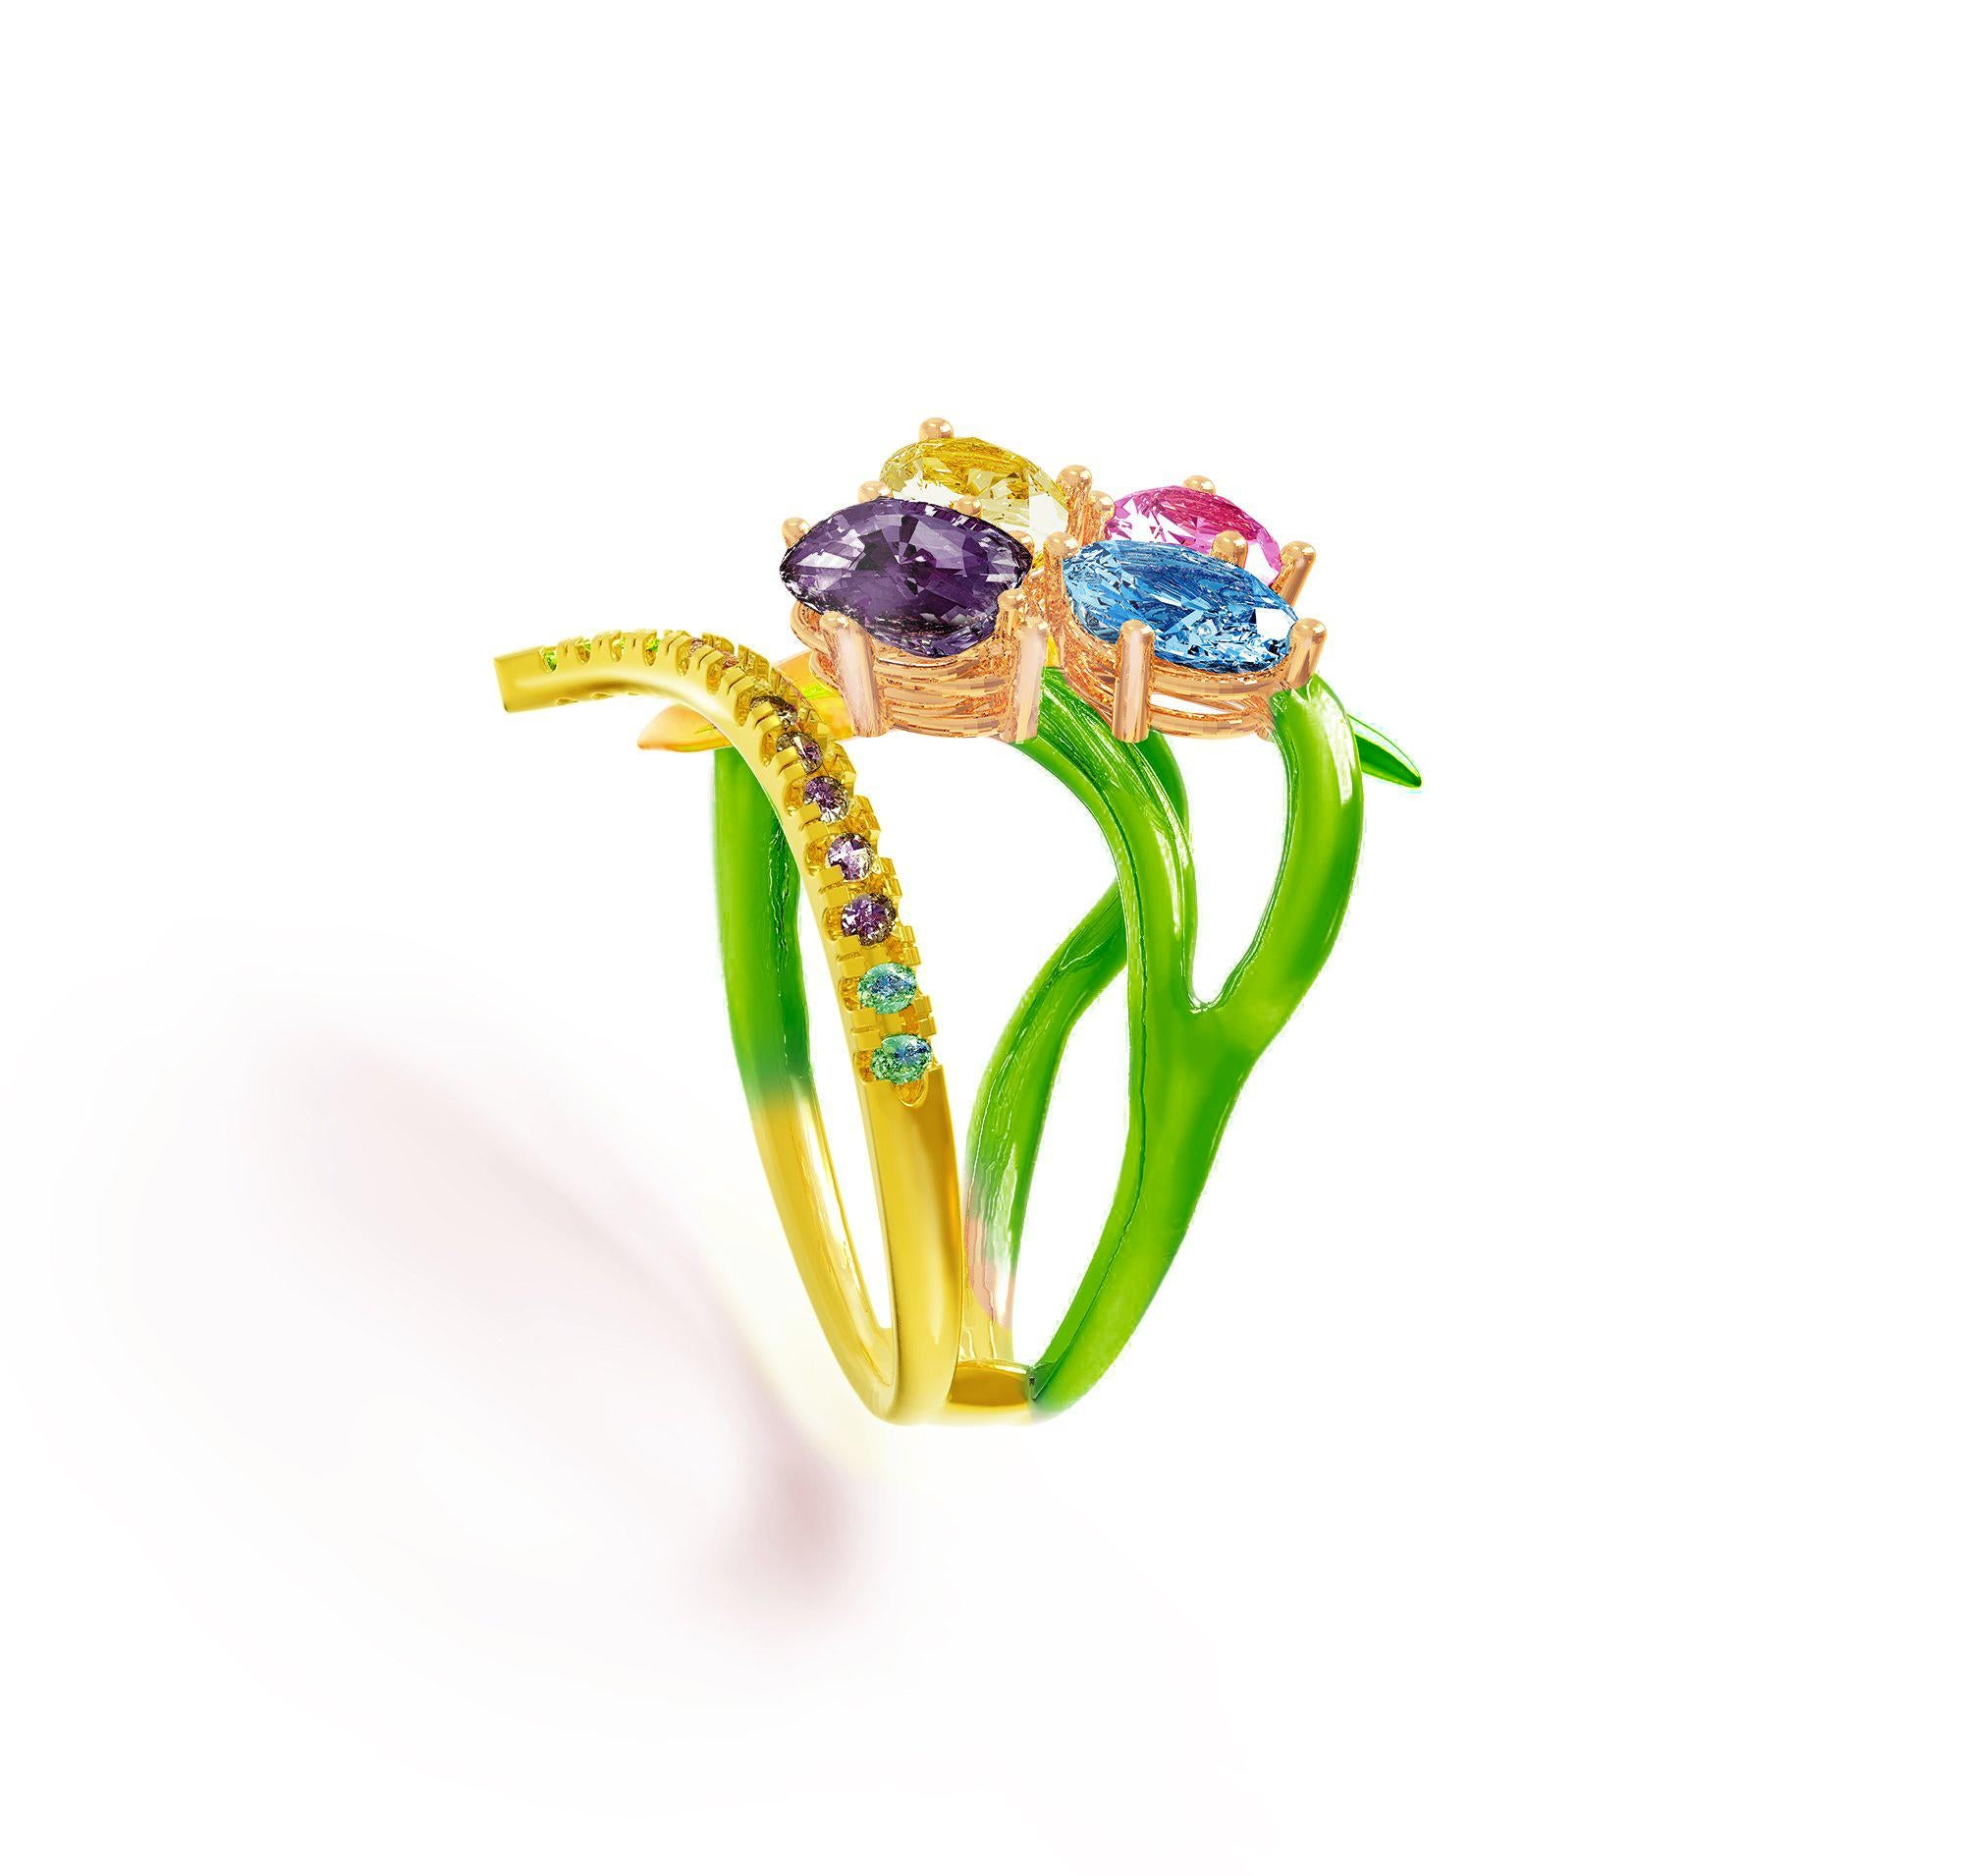 This Anime contemporary enamel ring is made of 18 karat yellow gold with natural gems of your choice custom-made. The gem options include oval or pear cut pink sapphire (2.17 carats), unheated untreated yellow sapphire in oval cut (1.61 carats),